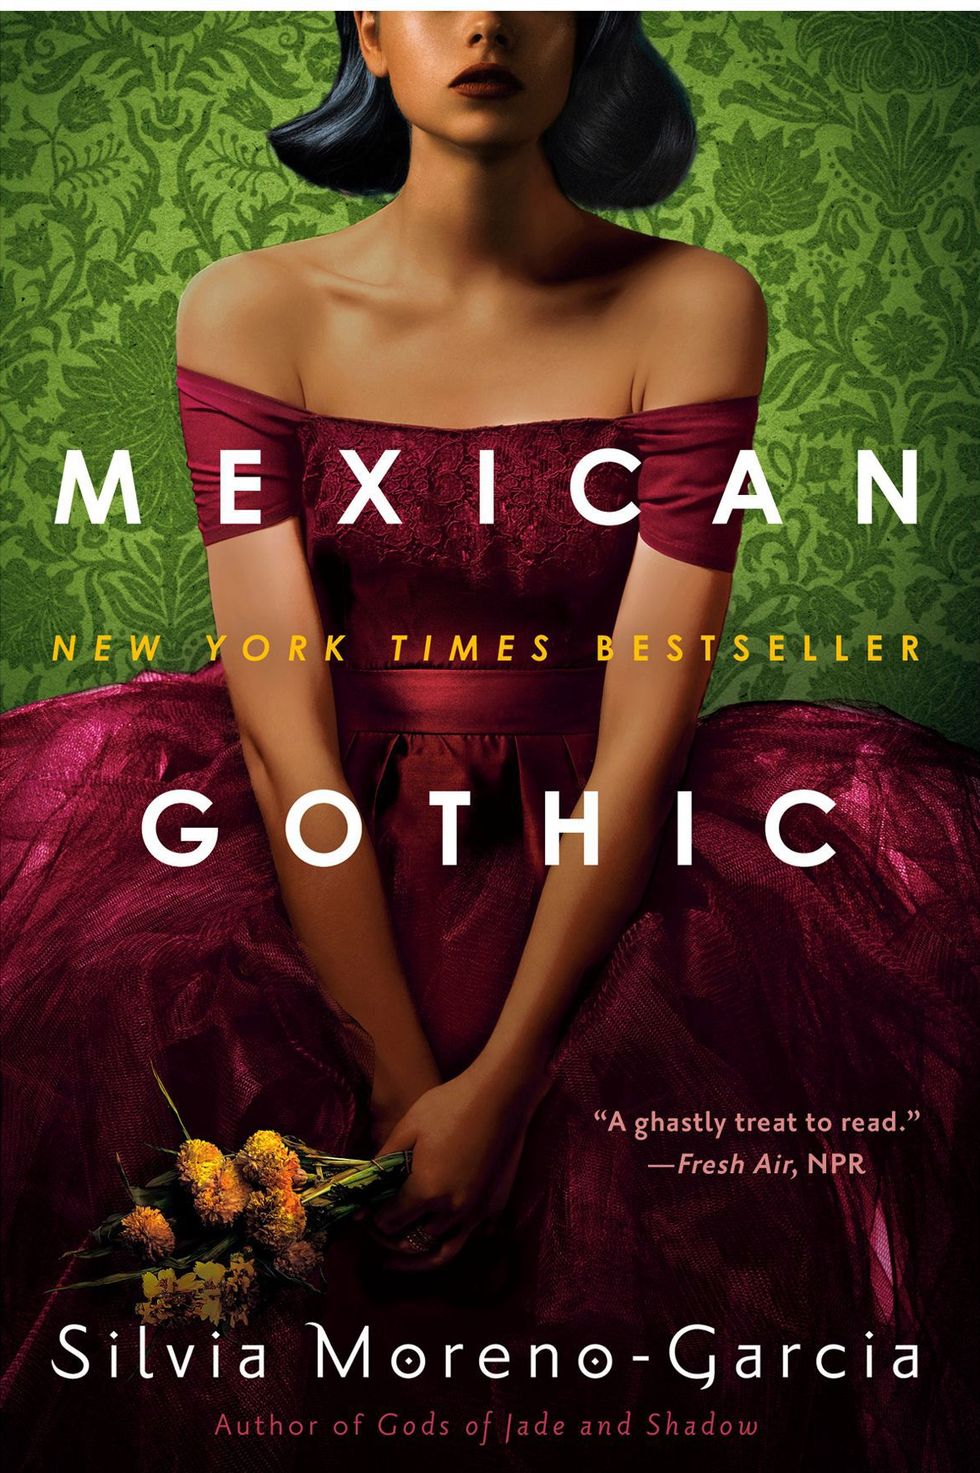 mexican gothic by silvia moreno garcia book cover featuring a woman in a wine red dress holding yellow flowers sitting in front of a green patterned wallpaper that features flowers